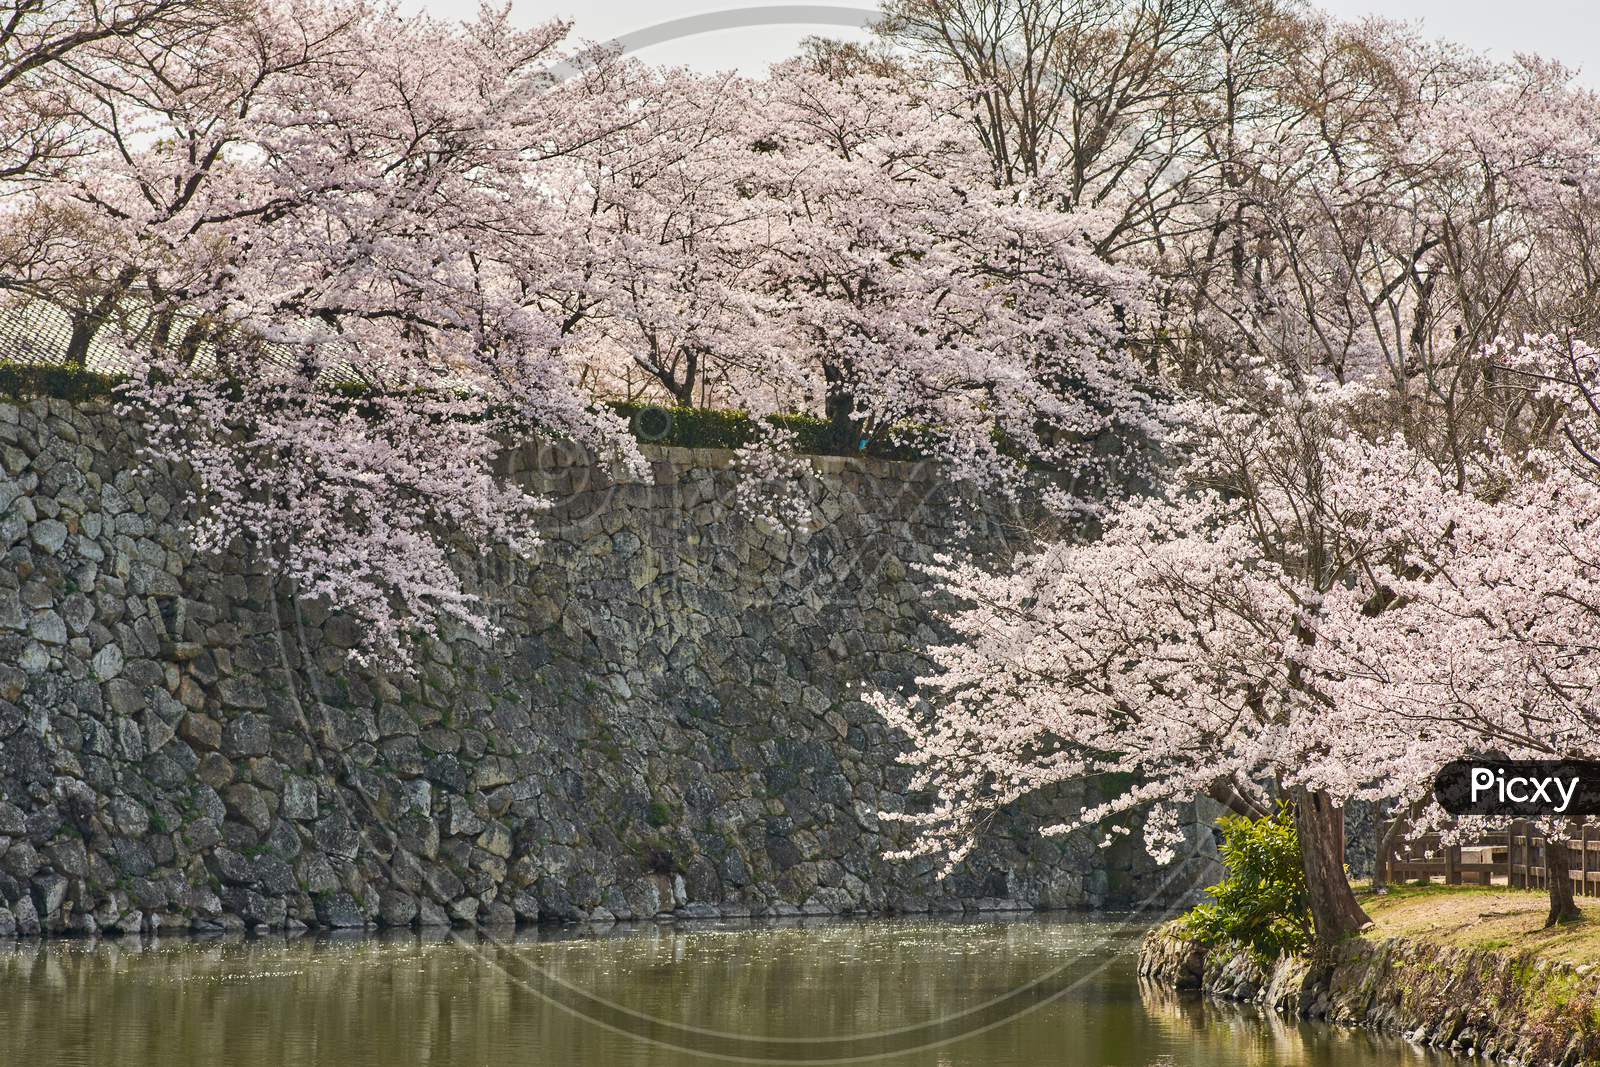 Himeji Castle Stone Walls And Water Moat During The Cherry Blossom Sakura Season In Himeji, Hyogo Prefecture, Japan